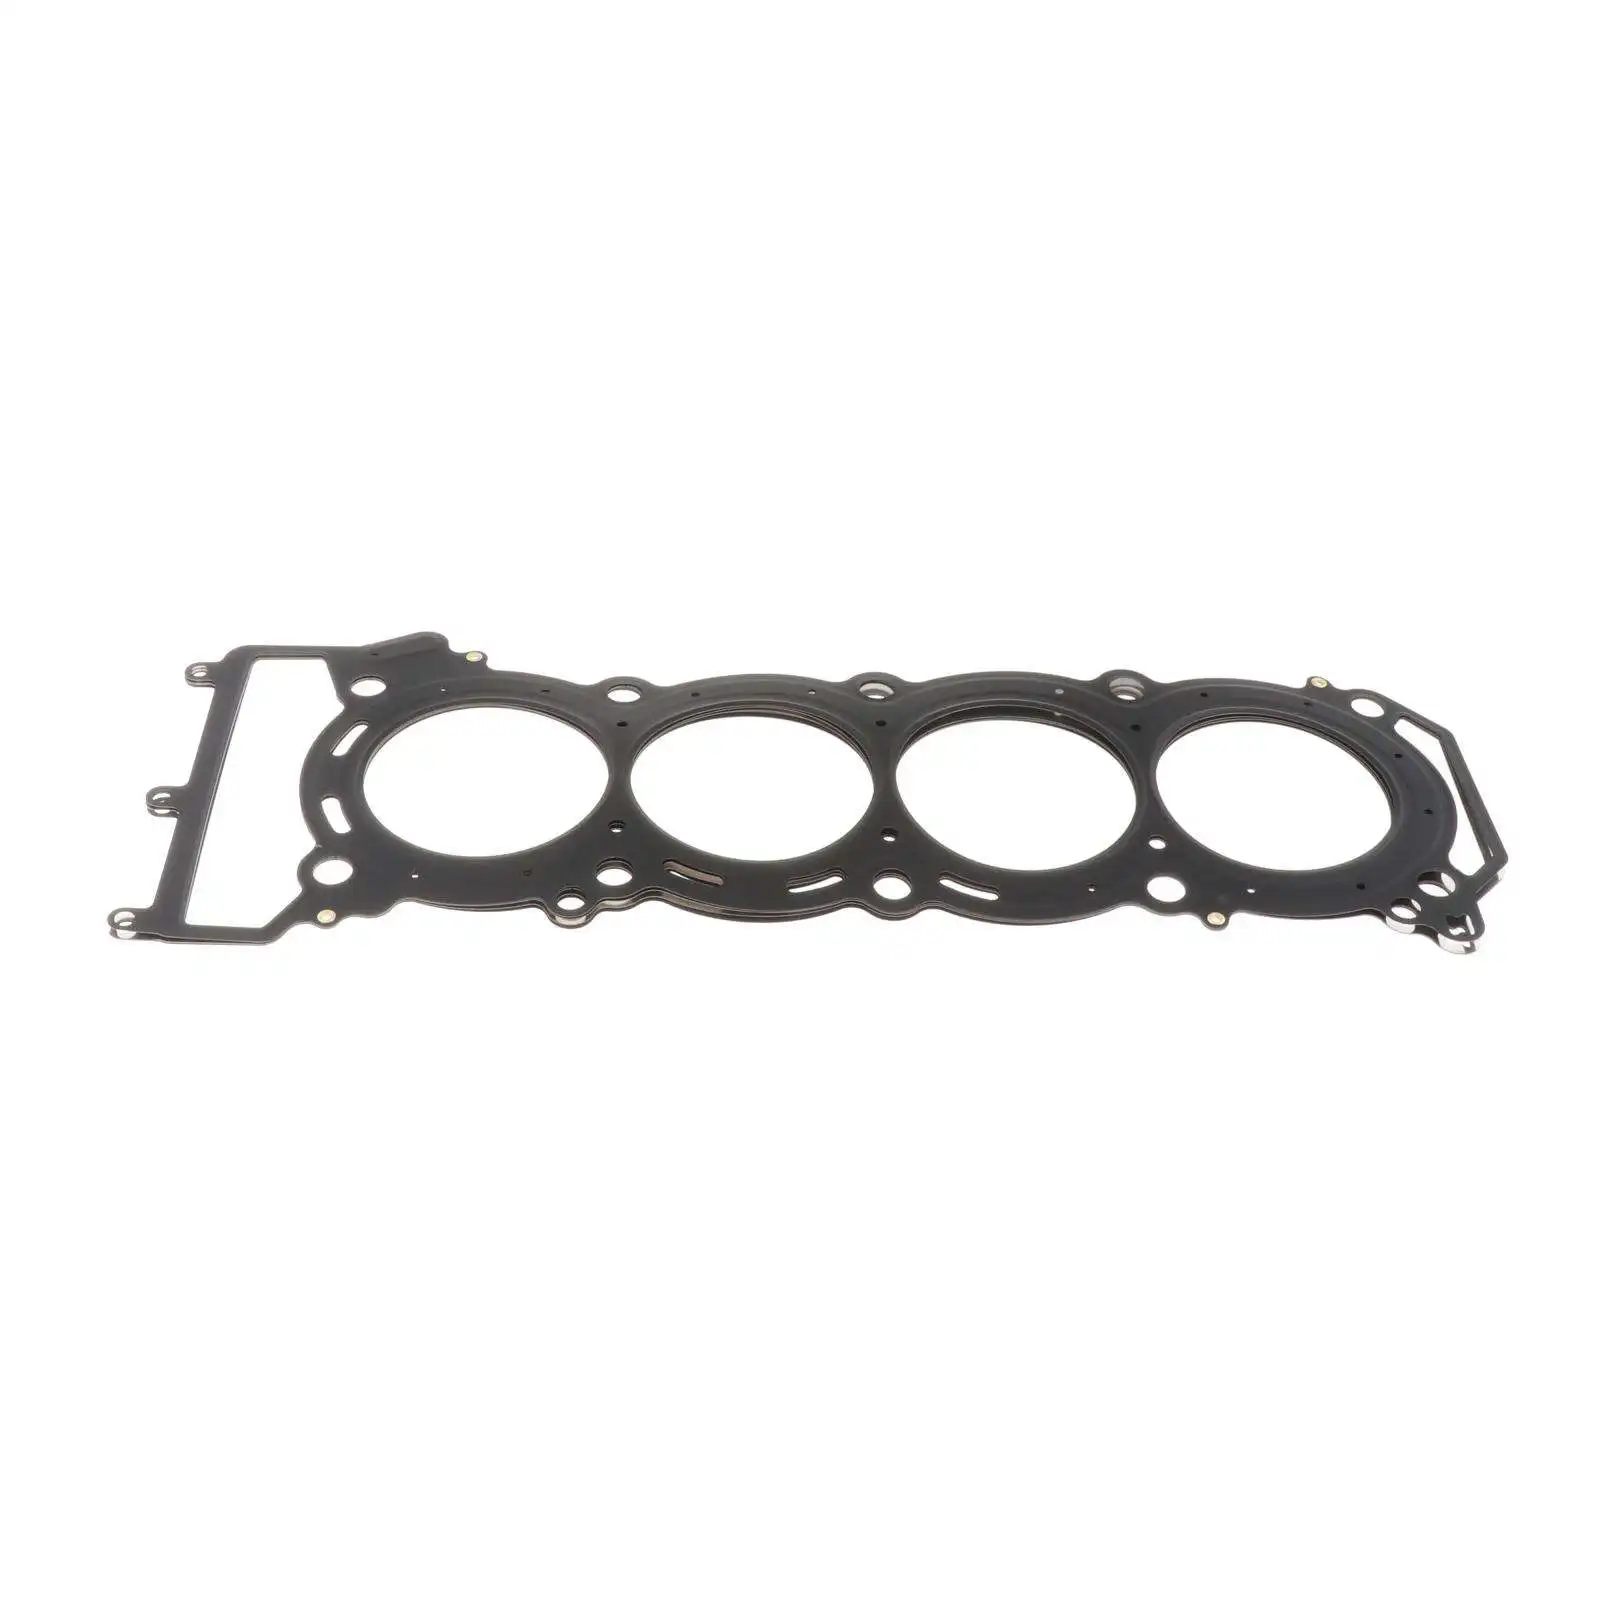 

Cylinder Head Gasket for Yamaha FX SHO (1.8L) 6BH-11181-00-00 Replace Parts Accessories